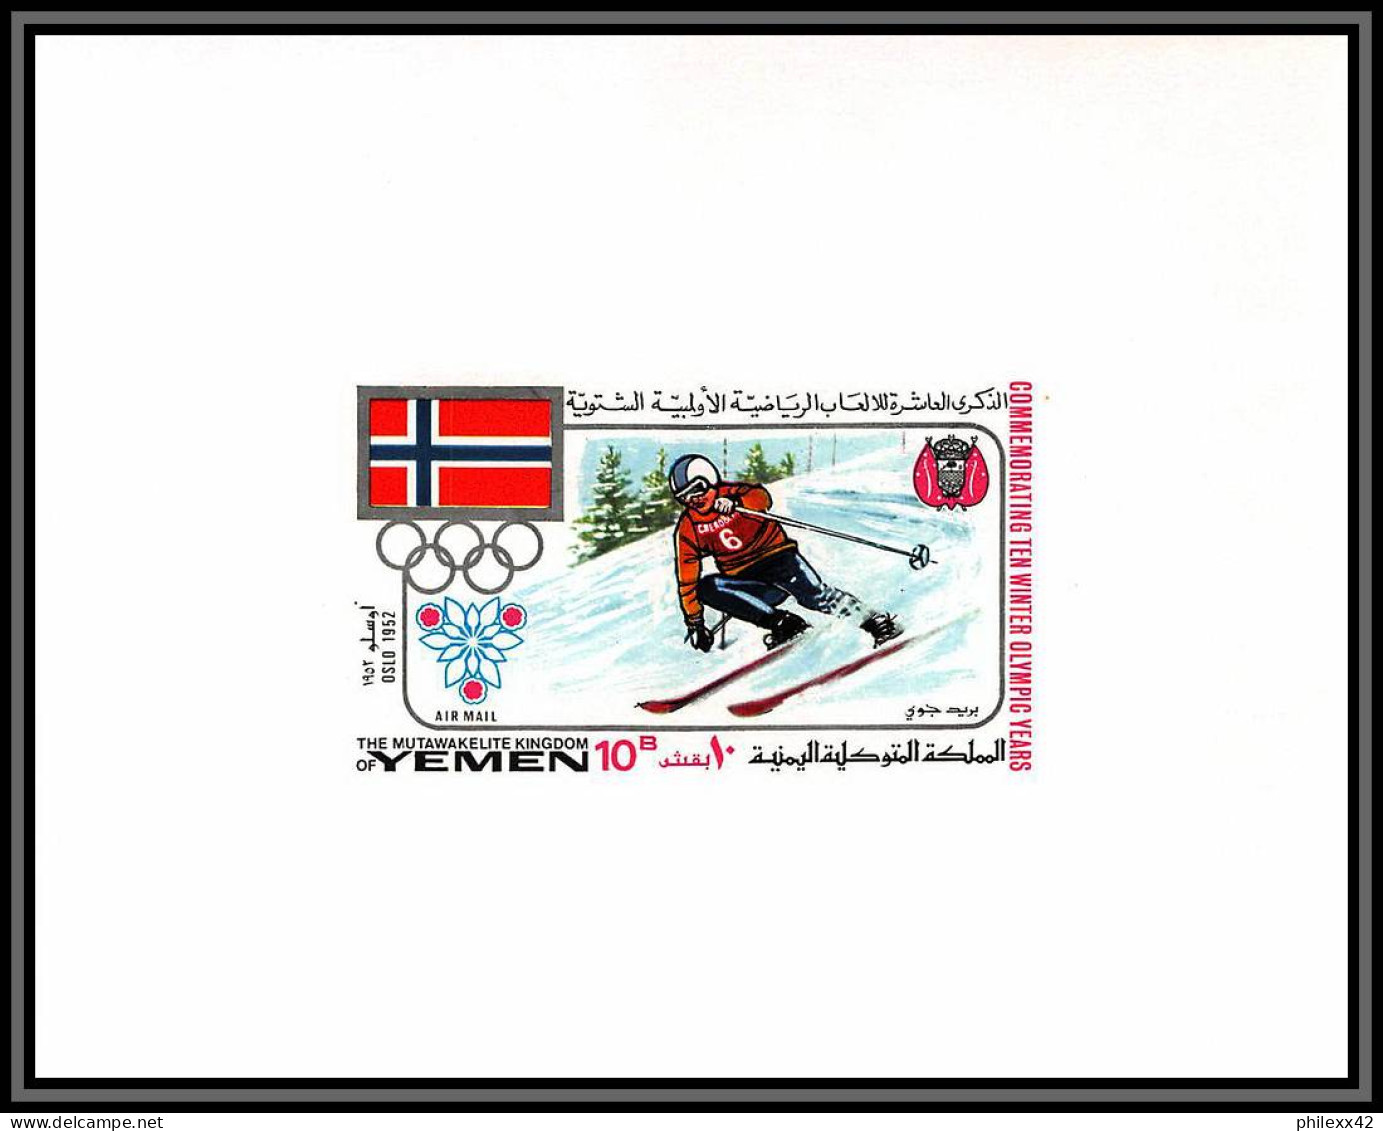 Yemen Royaume (kingdom) - 4290 N°534 Downhill Ski Deluxe Sheets Proof Jeux Olympiques Olympic Game Grenoble 1968 ** MNH - Hiver 1968: Grenoble